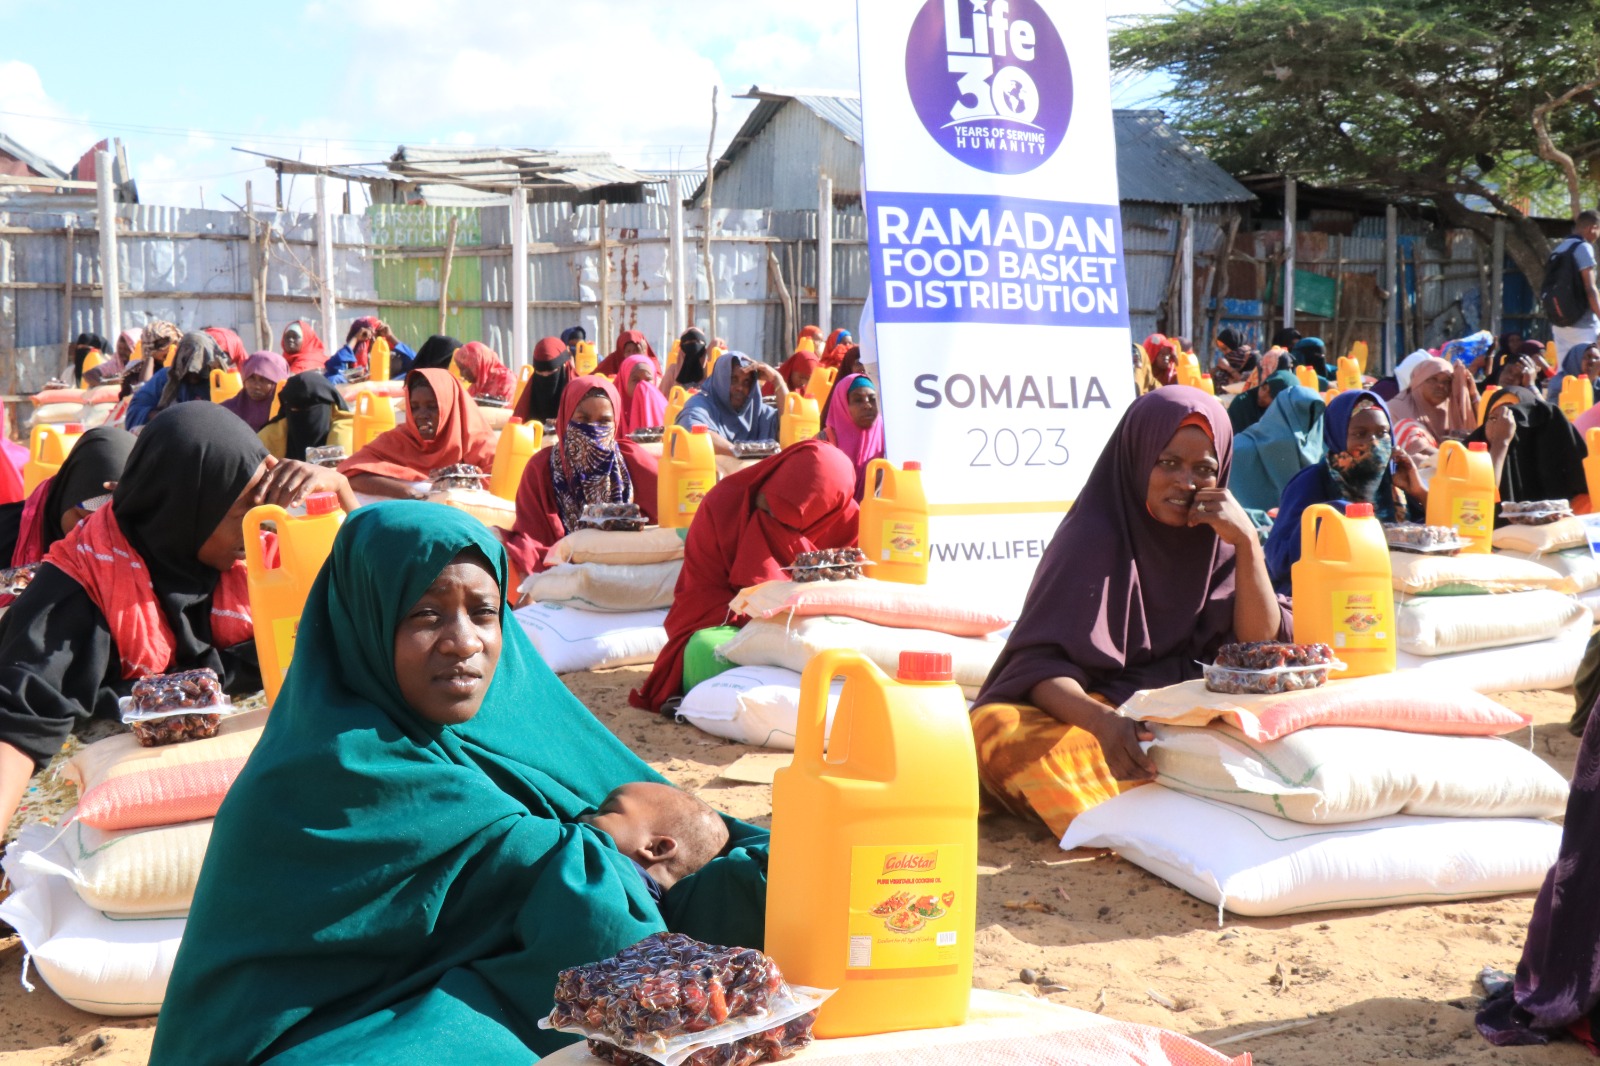 The Life For Relief And Development organization distributed aid to families living in Mogadishu